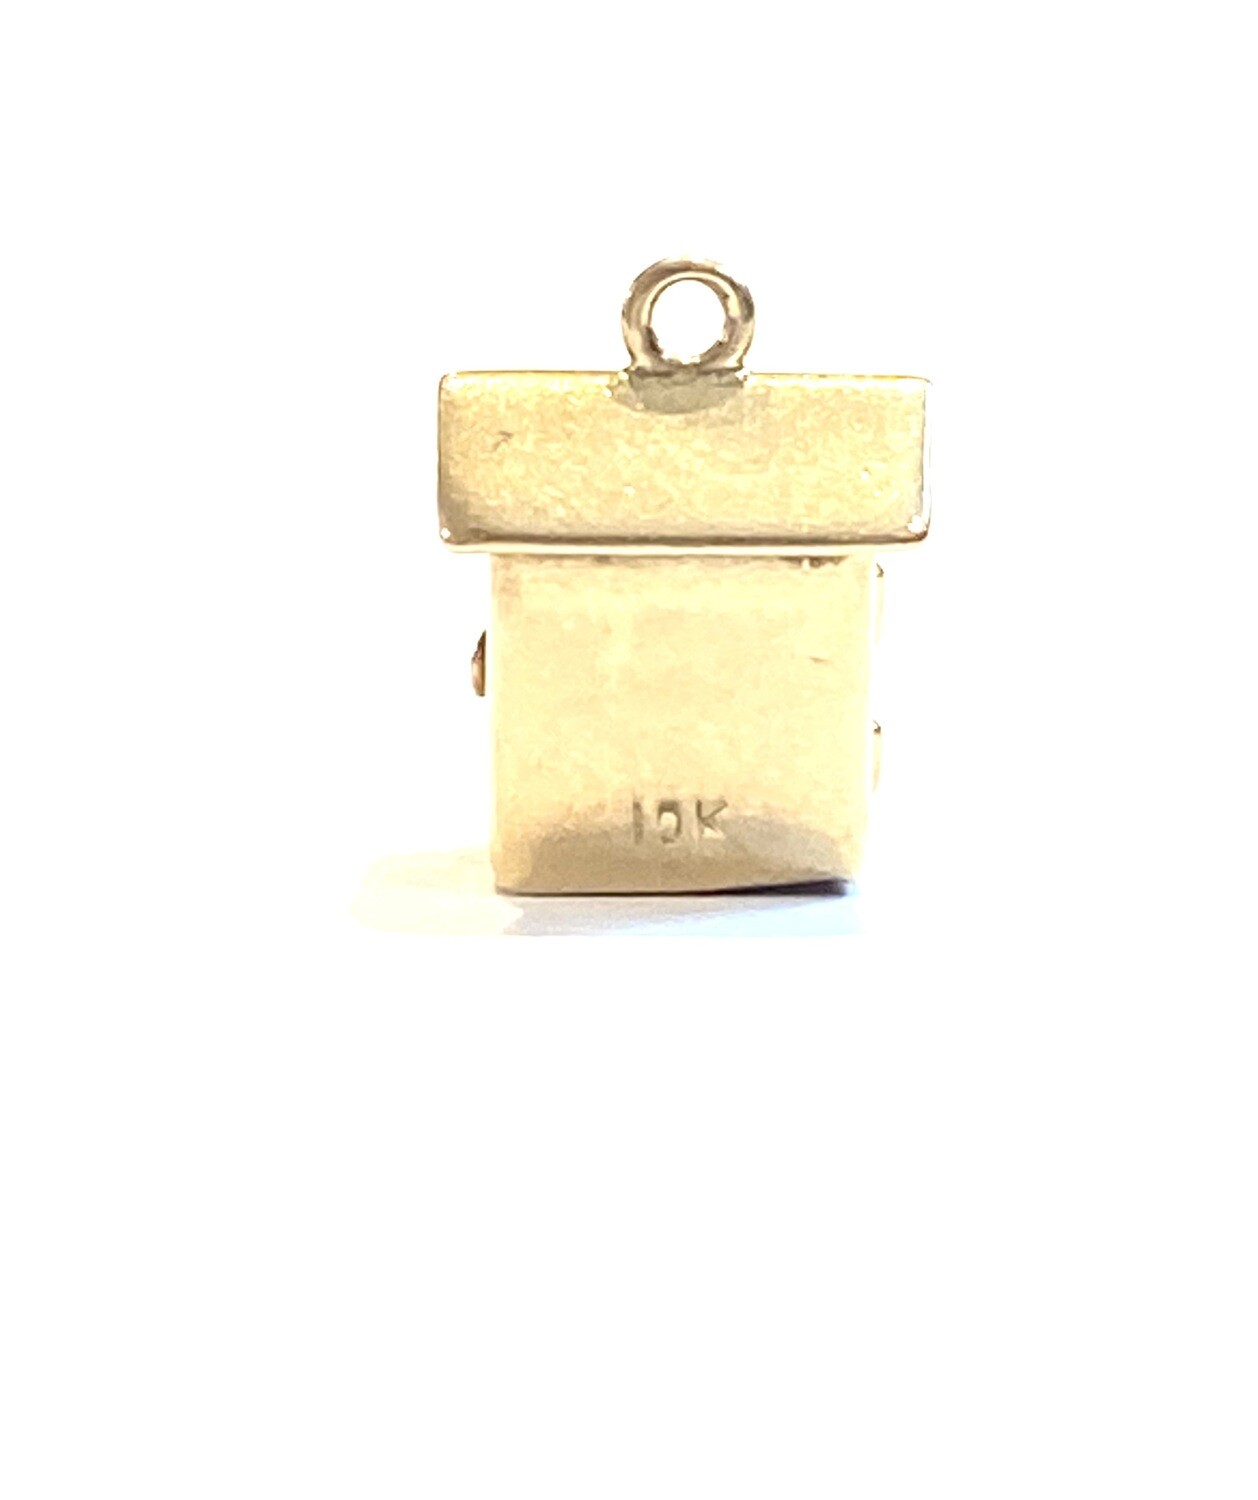 10ct rare outhouse charm with sam and Lew inside